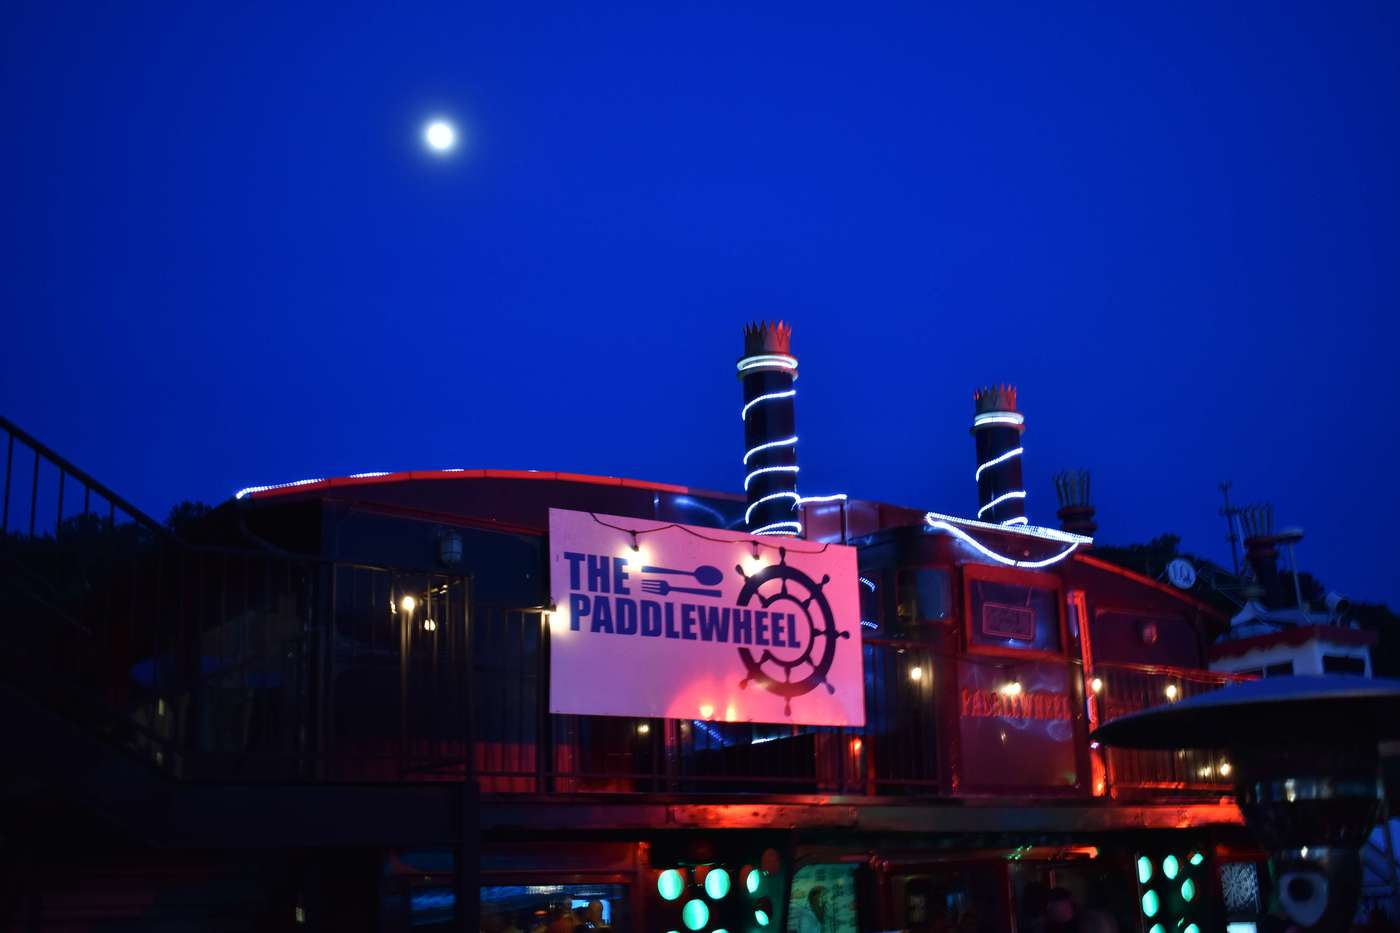 A beautiful moon floats over The Paddlewheel